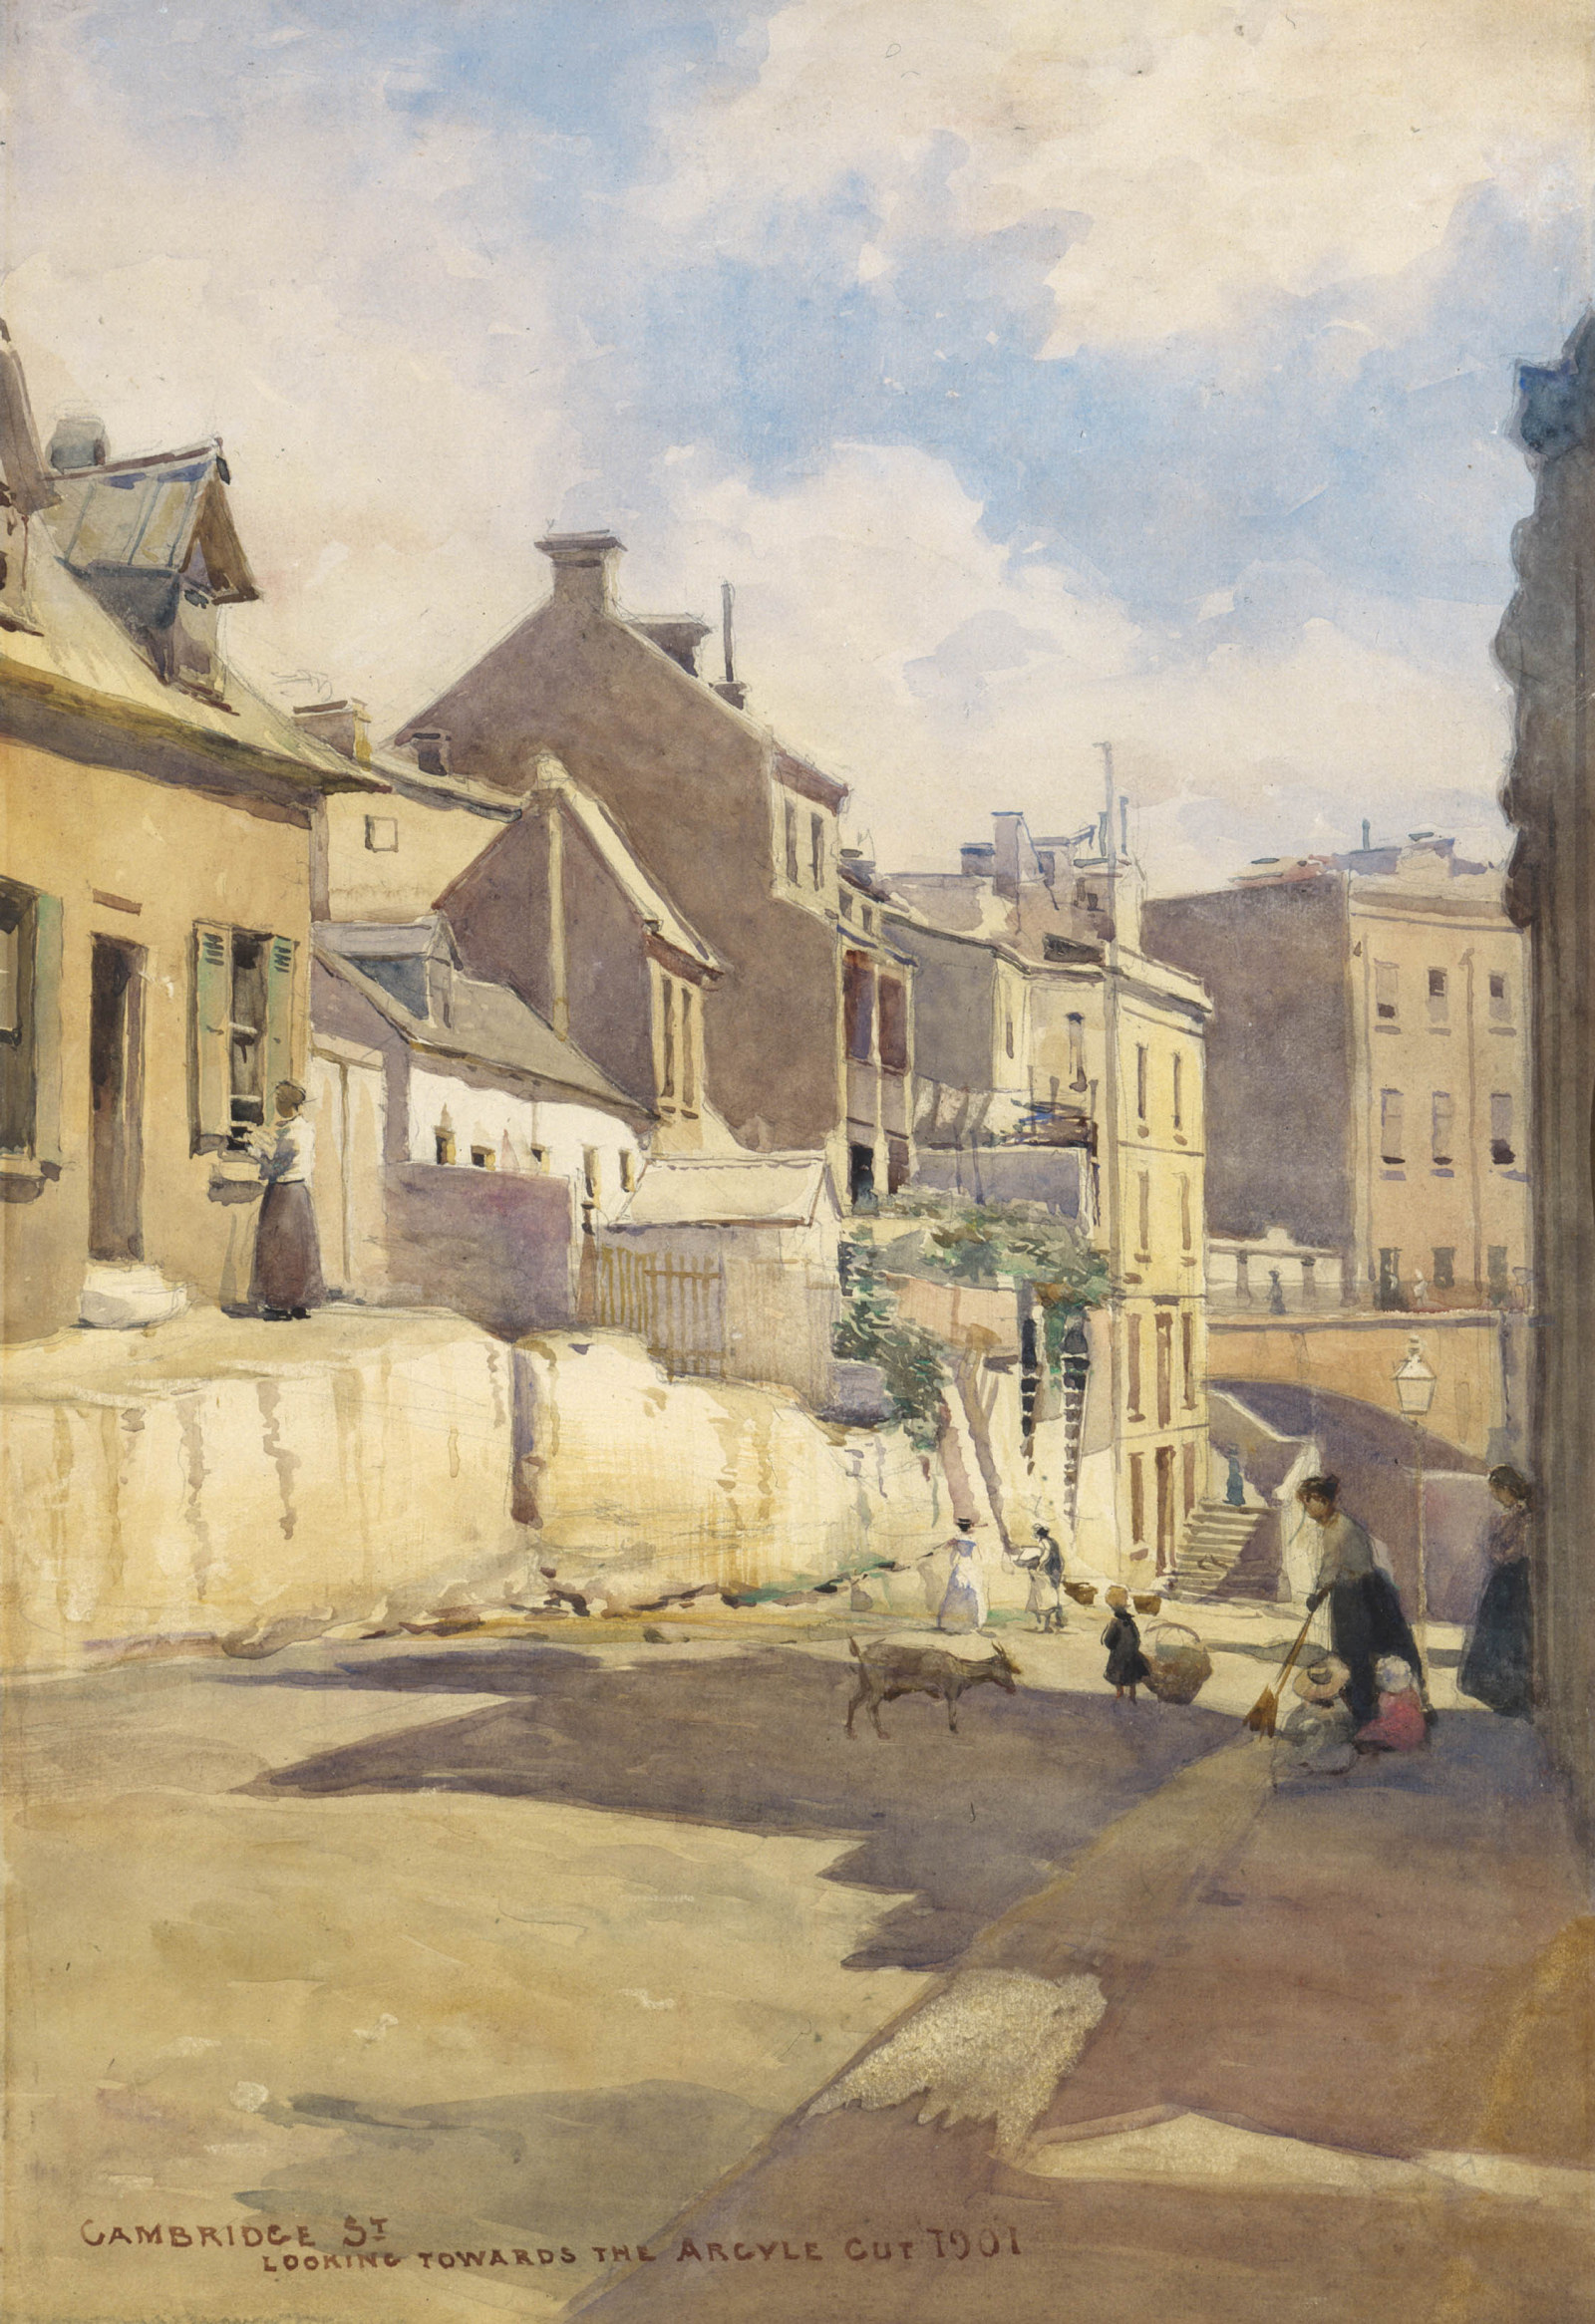 Painting of street scene. A lady, children and a goat gather in a street carved out of the sandstone with a mix of small houses above.